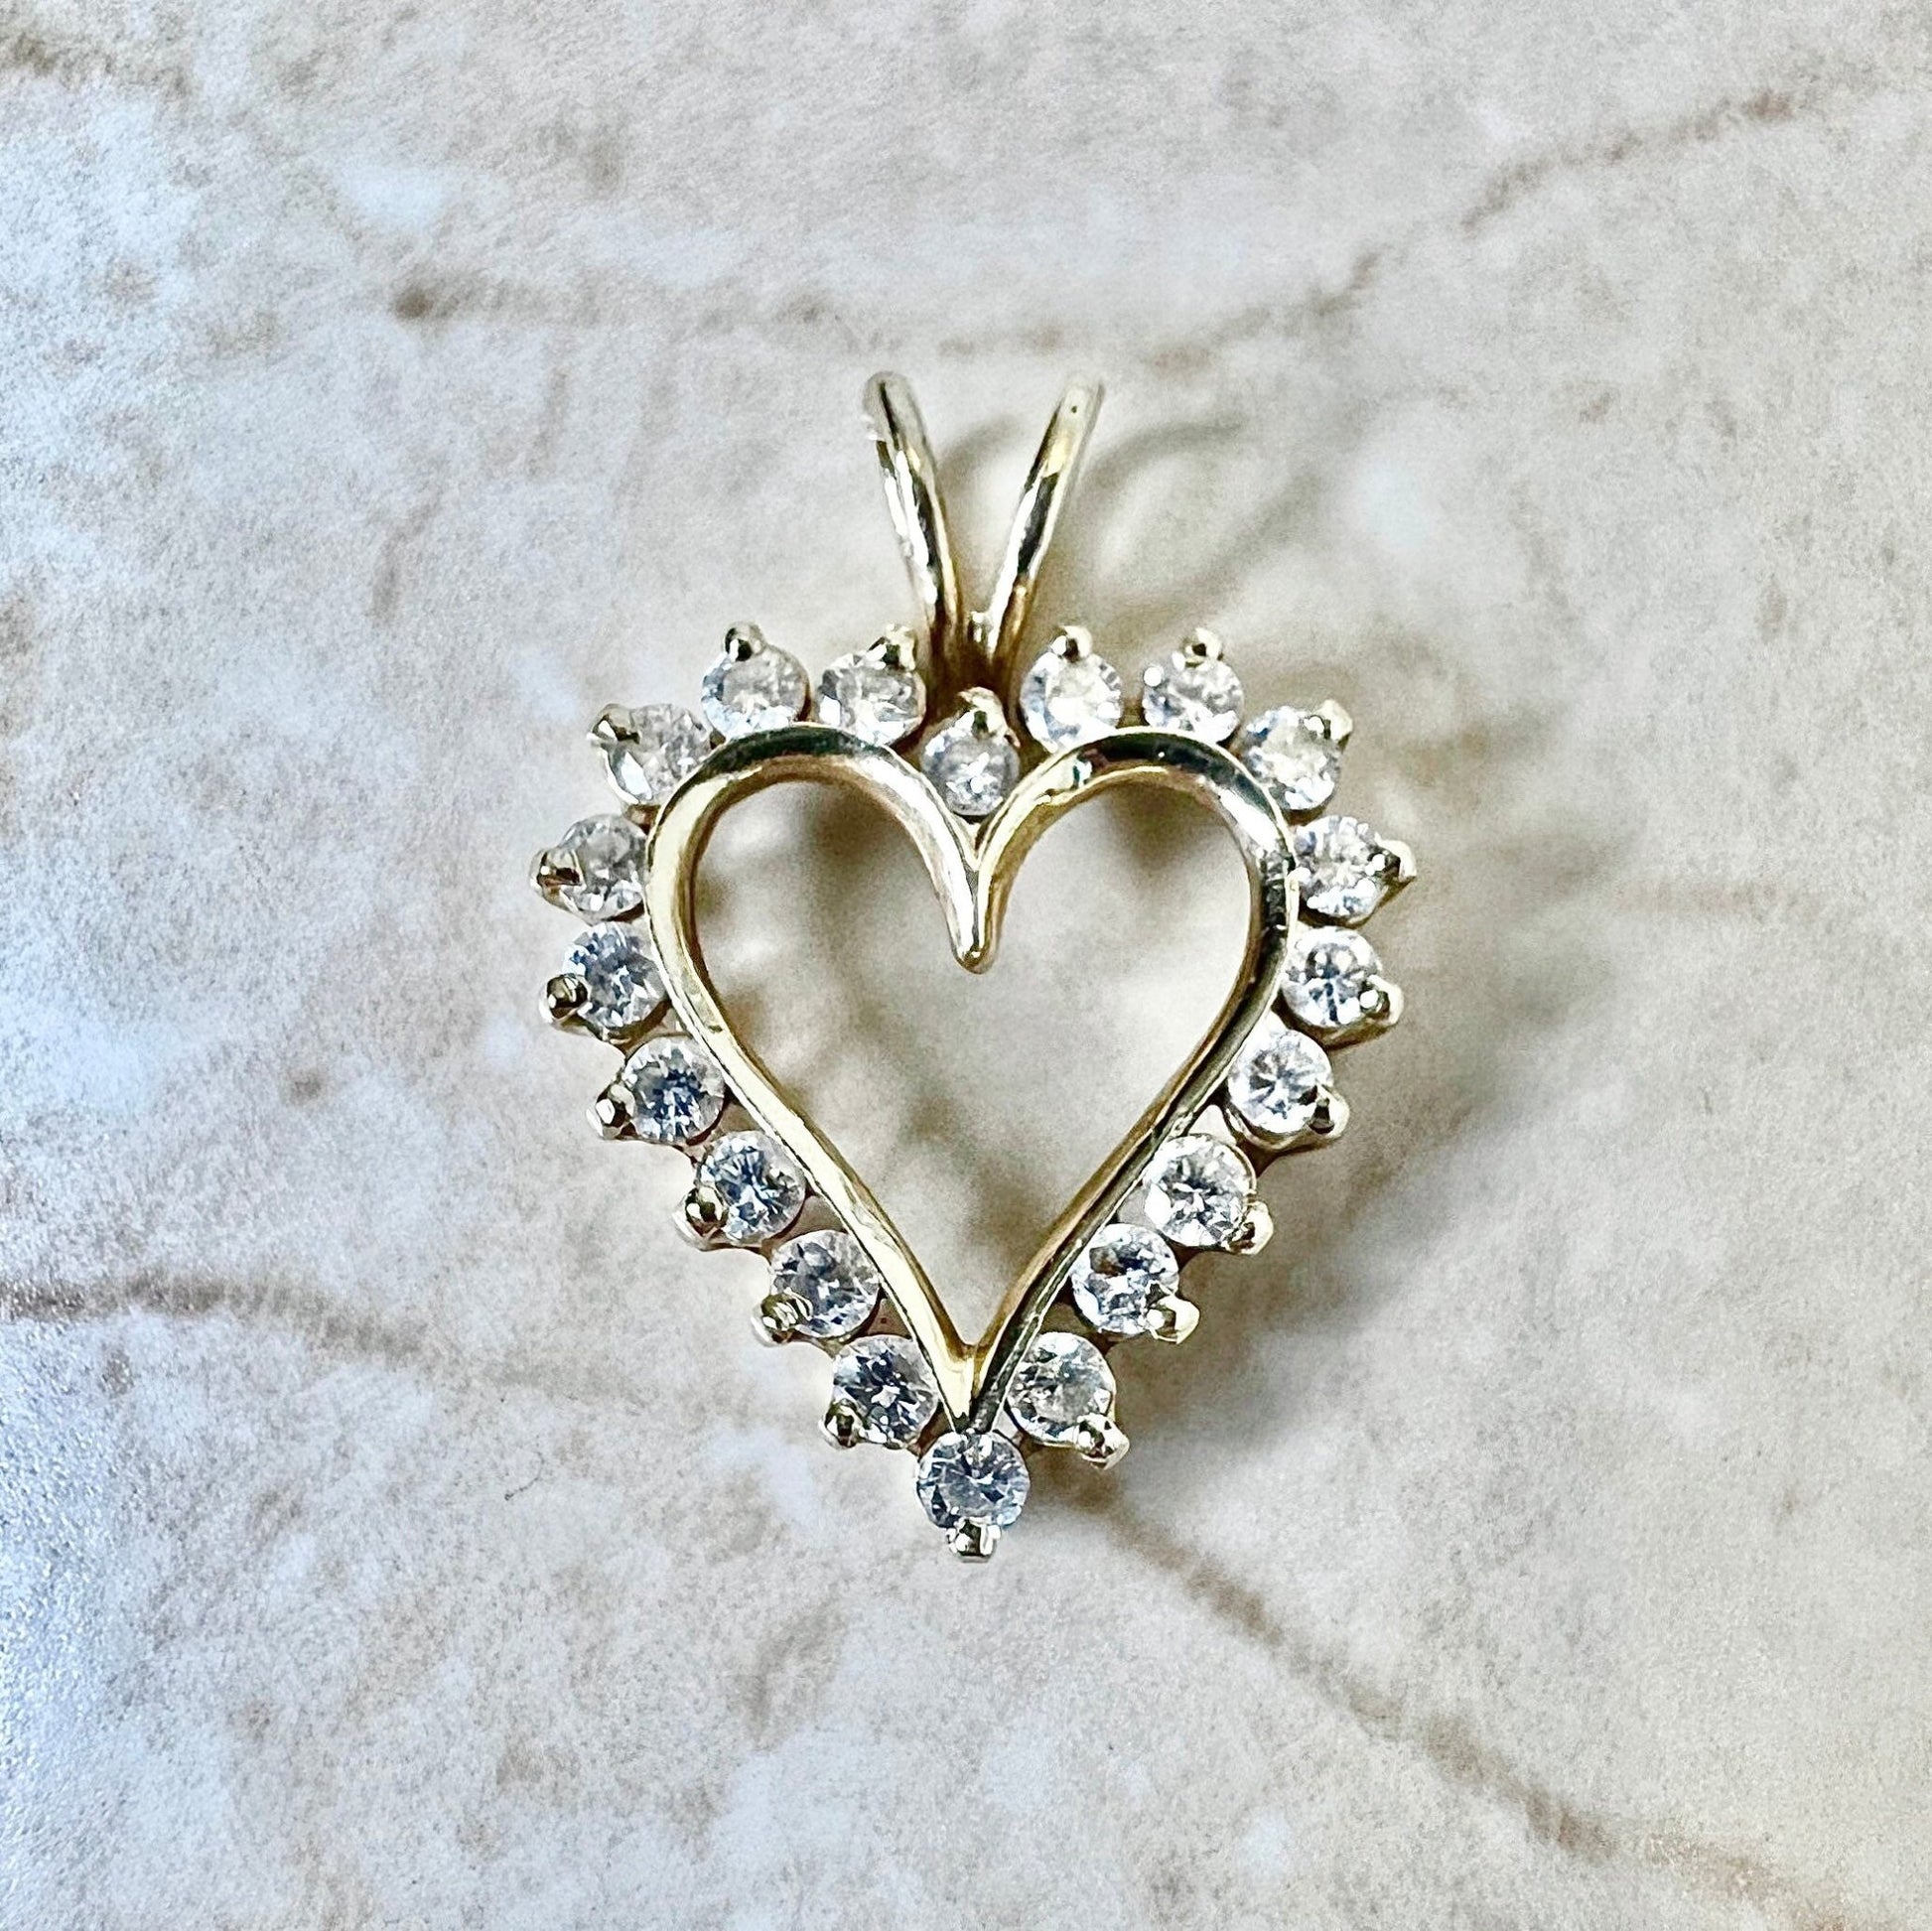 1 CTTW 14K Gold Diamond Heart Pendant - Yellow Gold Diamond Pendant Necklace - Heart Necklace - Valentine’s Day Gifts - Best Gifts For Her